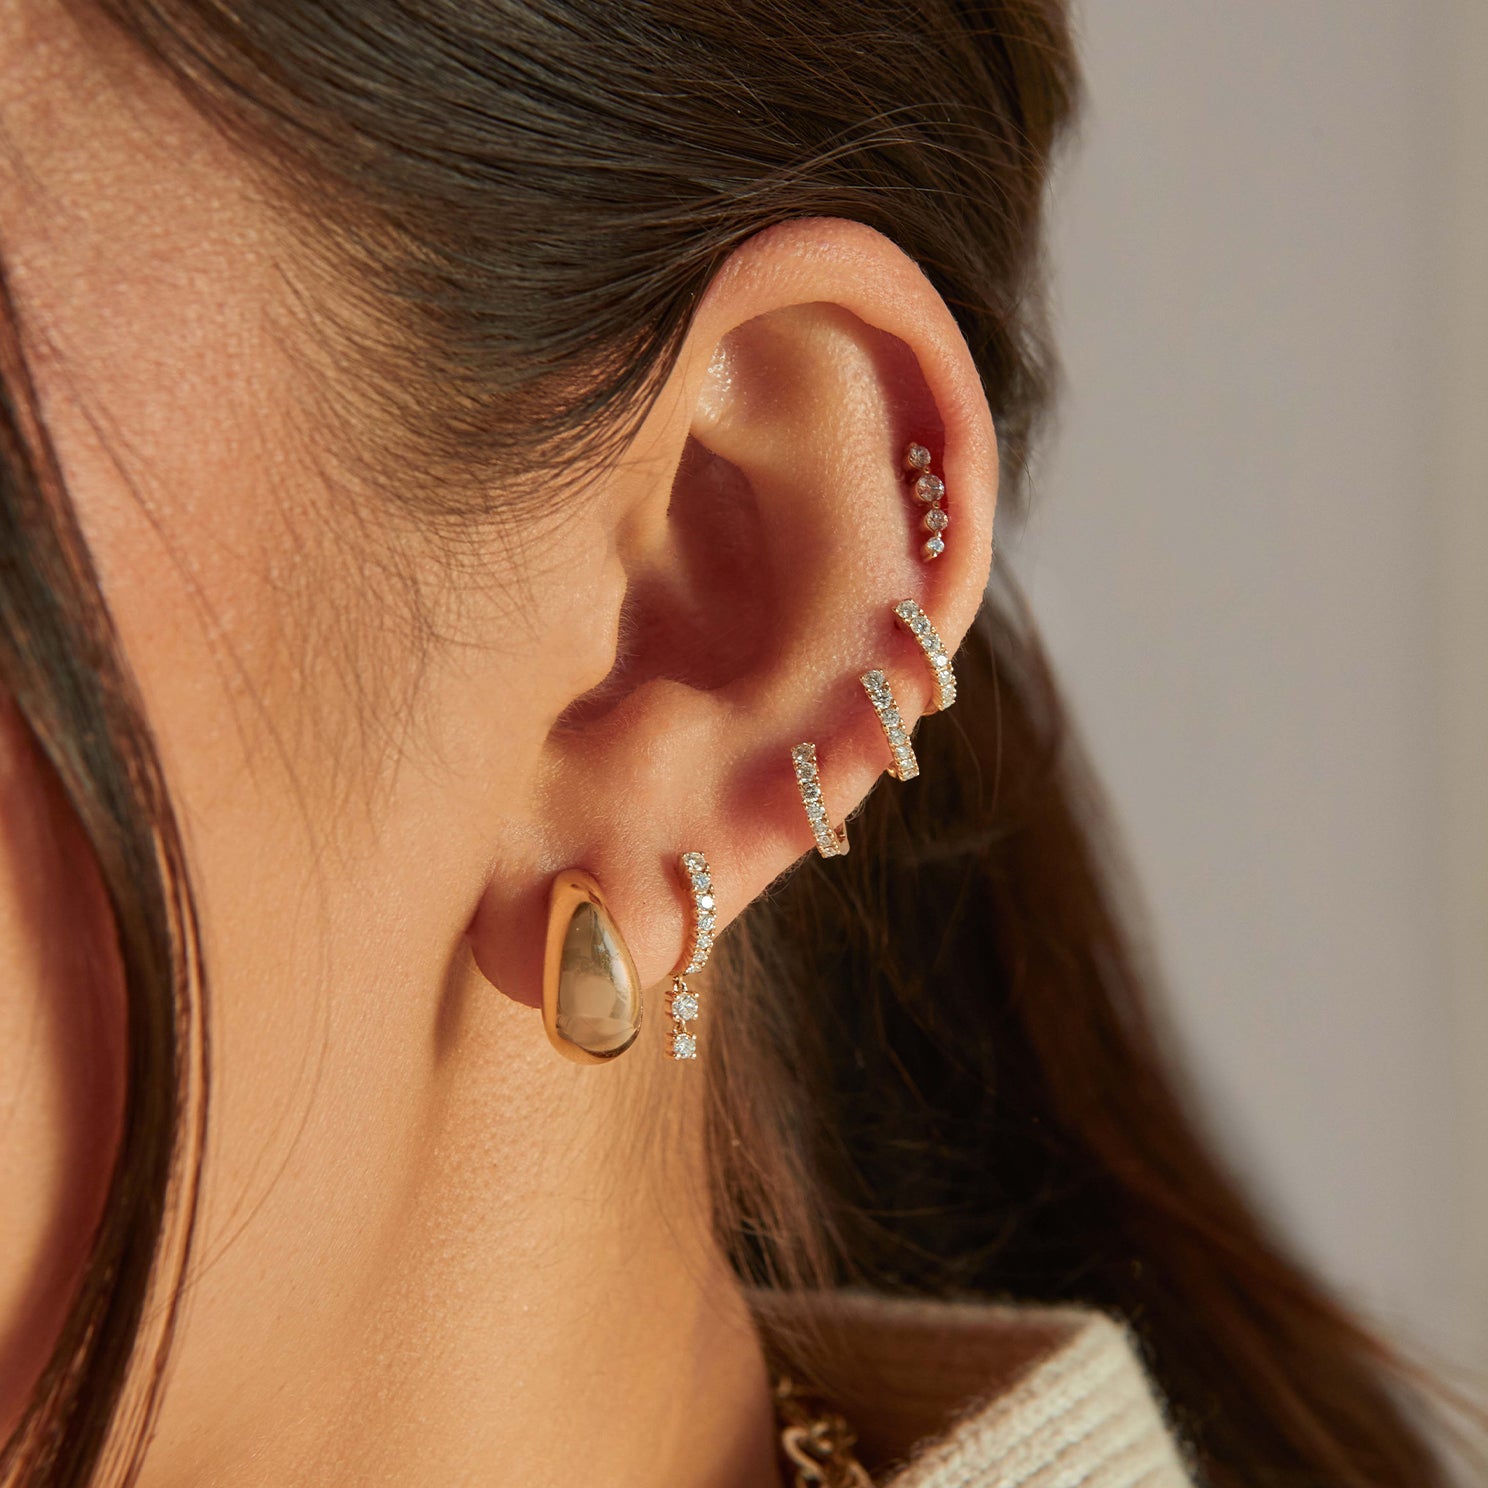 Gold Jumbo Dome Hoop Earrings in 14k yellow gold styled on first earring hole of model next to five diamond earrings